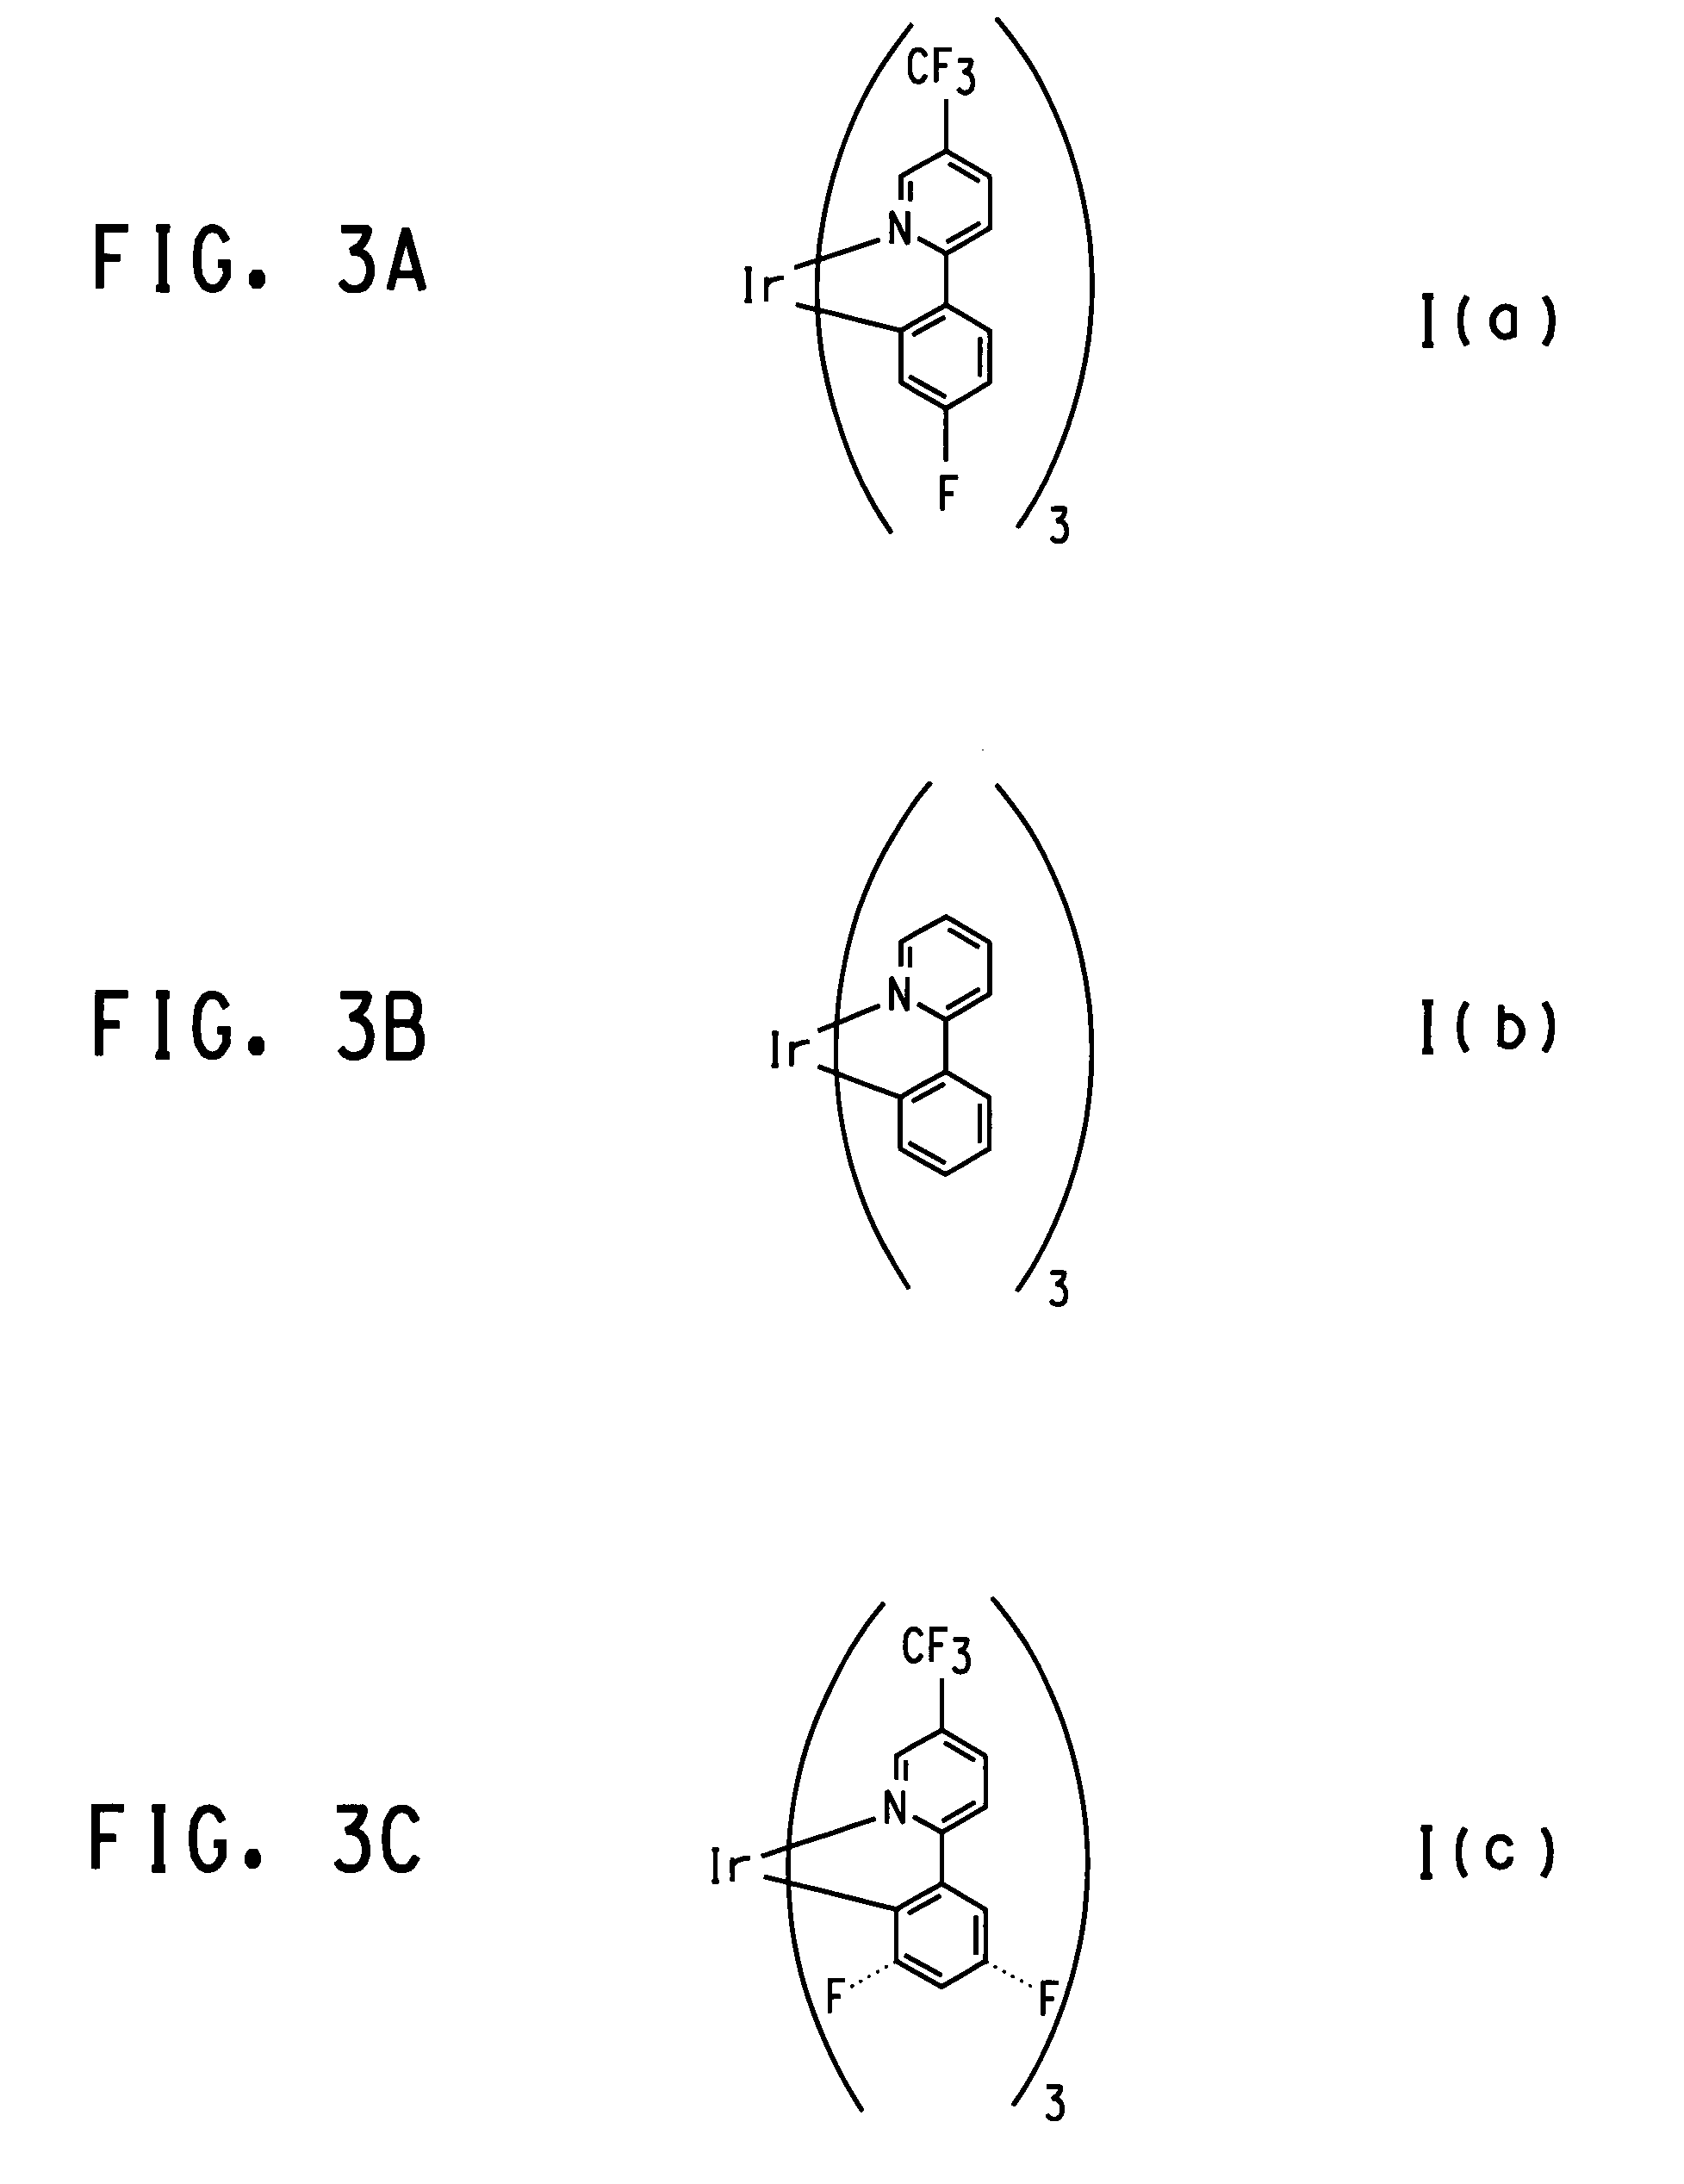 Electronic devices made with electron transport and/or anti-quenching layers